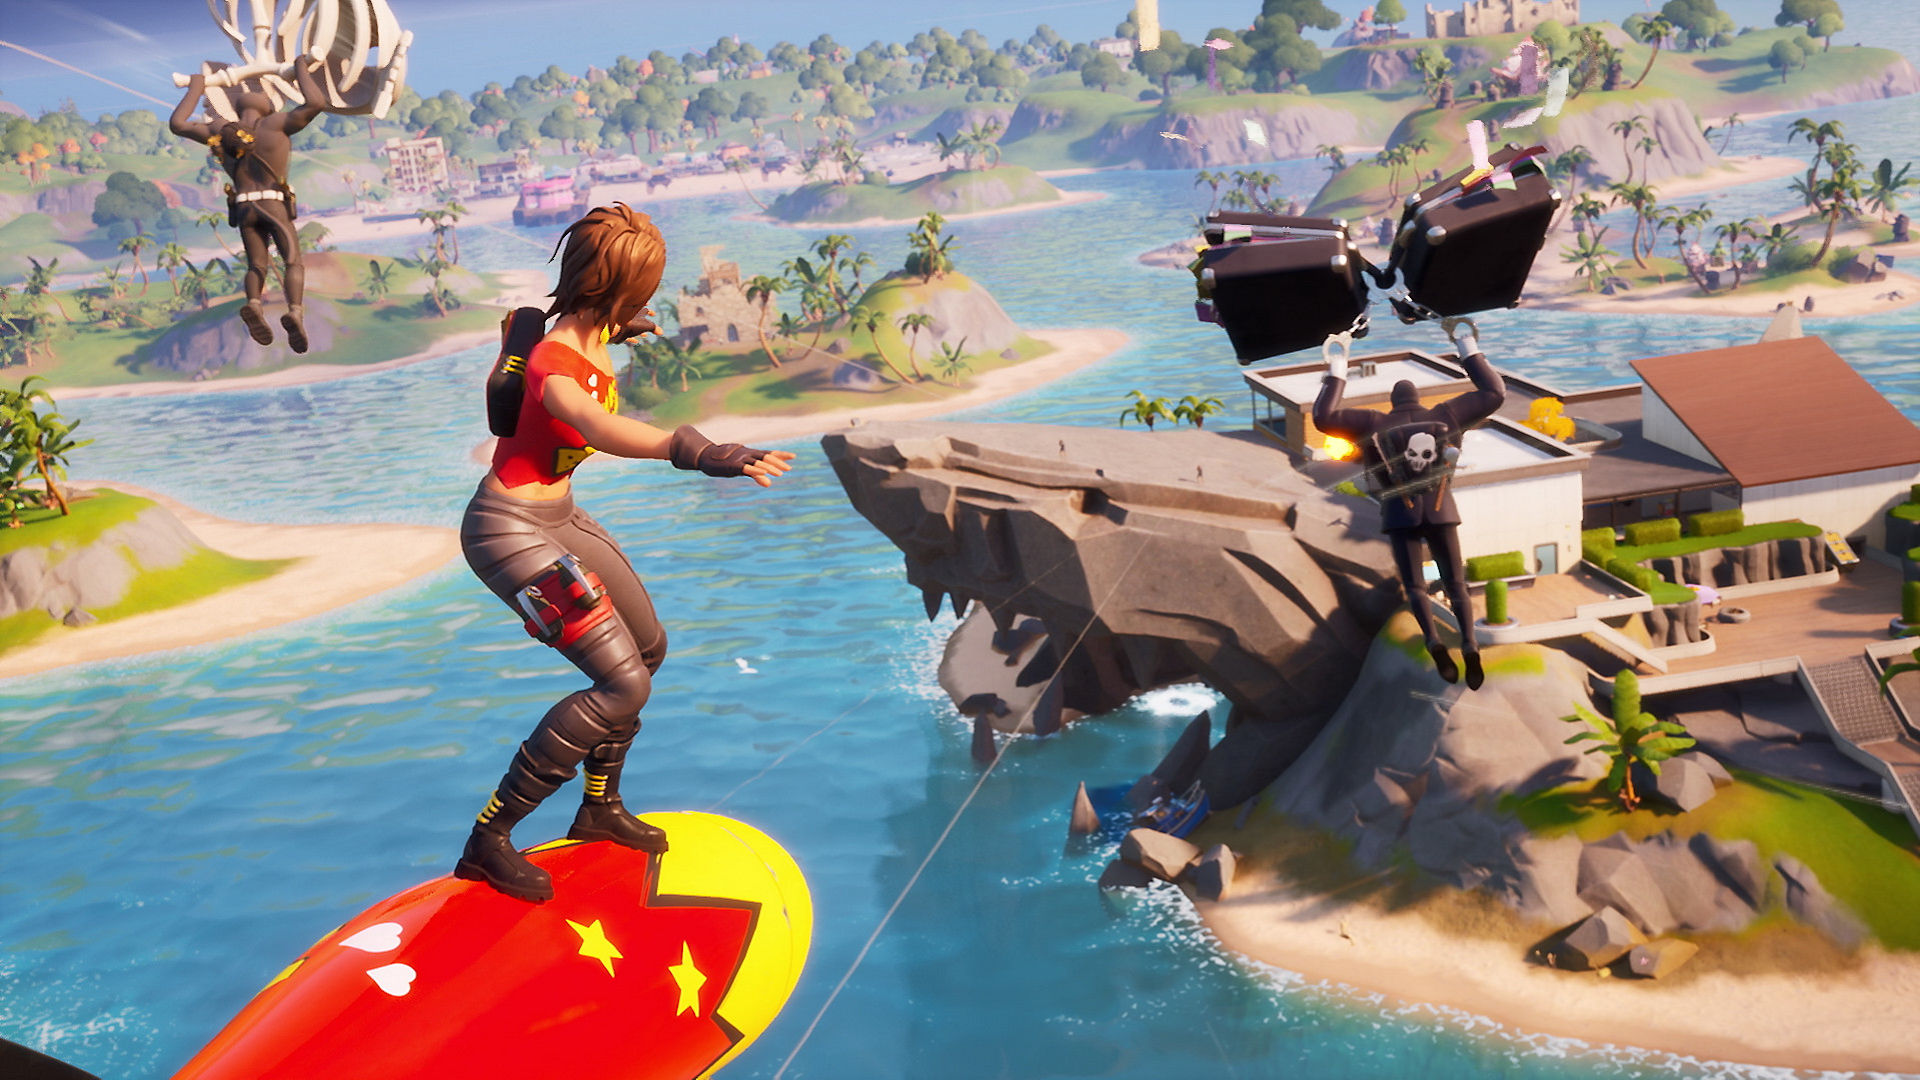 Fortnite android: a character on a hoverboard over the water